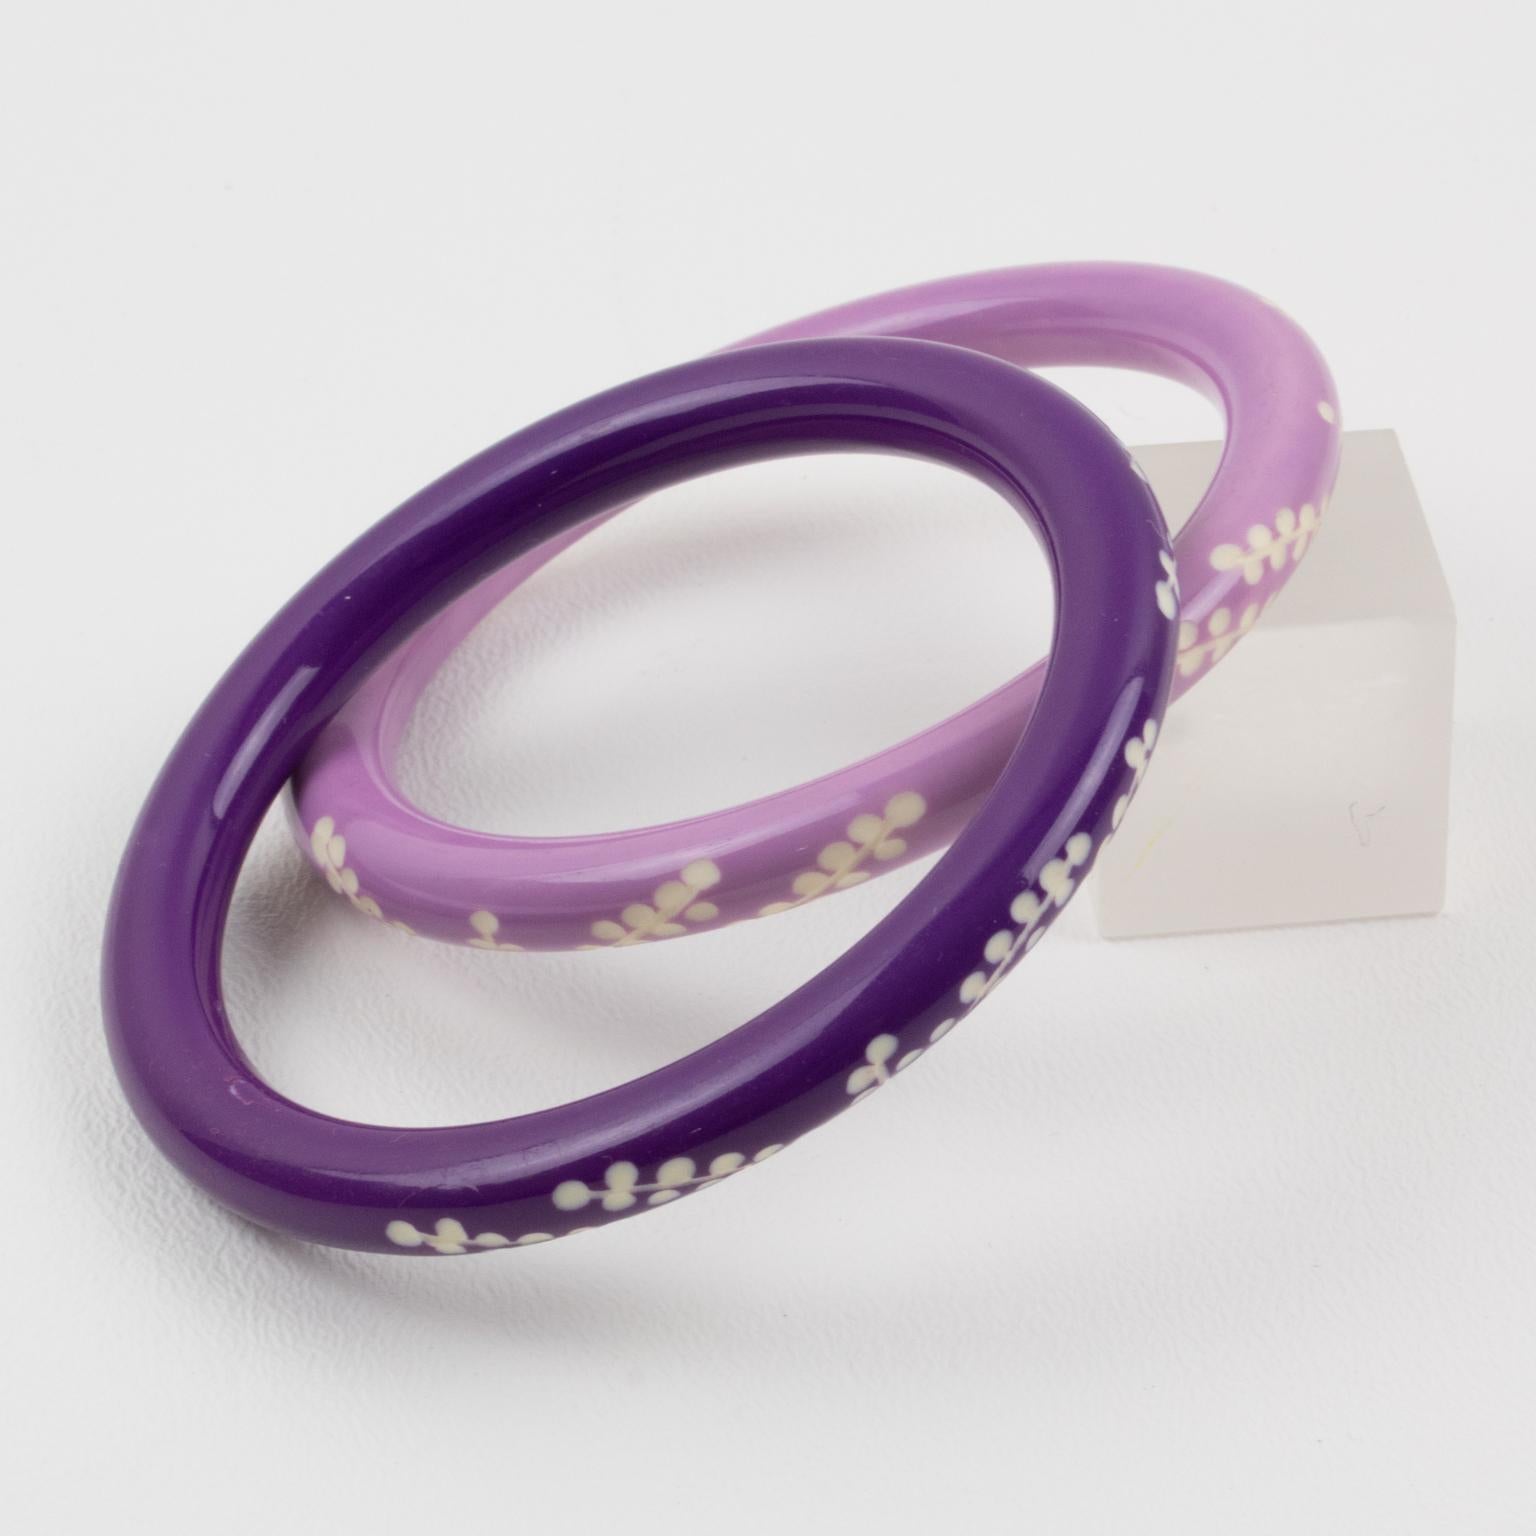 Lovely Galalith bracelet bangle, set of two pieces. Chunky spacer domed shape with deep floral carving all around. Assorted colors of purple lavender and amethyst purple over white background. 
Measurements for one bracelet: Inside across is 2.50